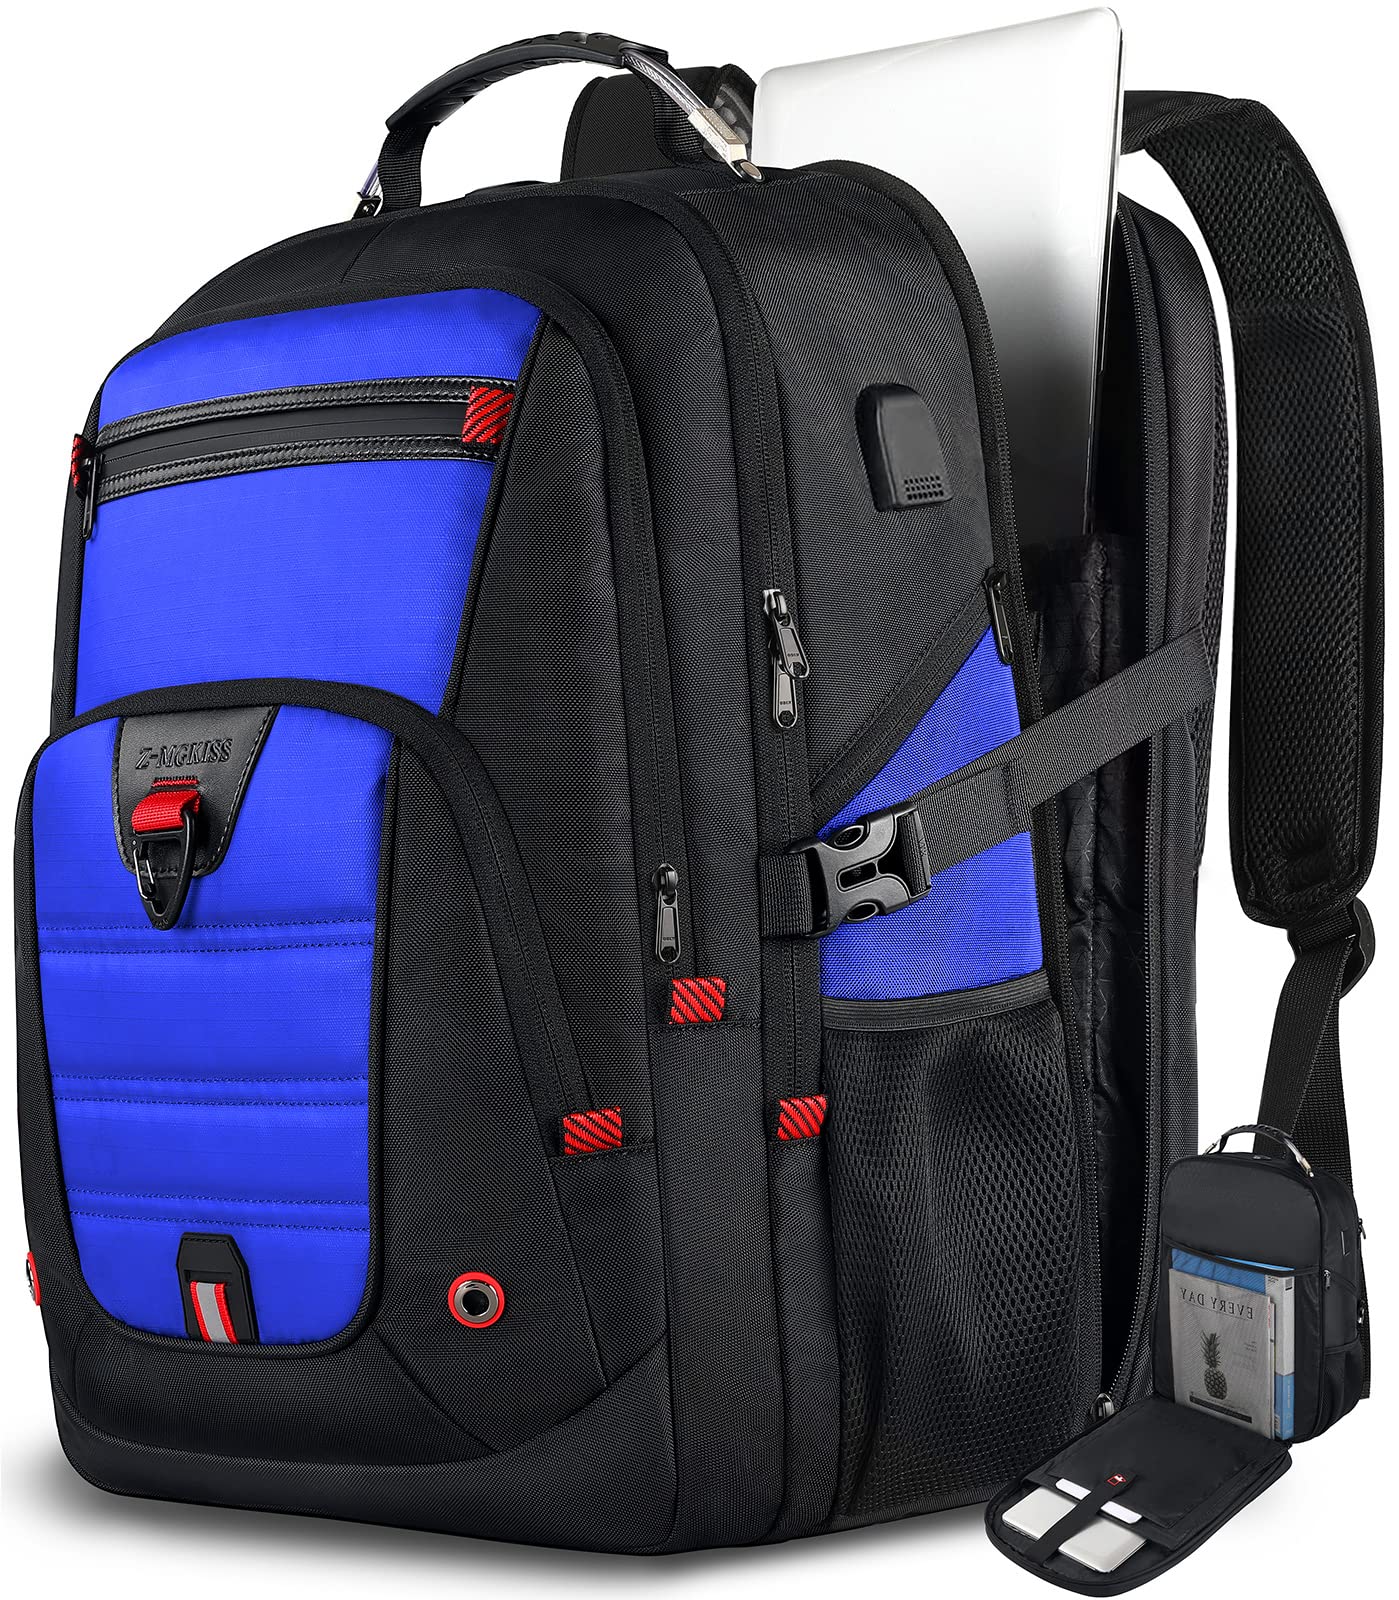 Backpack 17.3 Inch, Laptop Backpack, Carry on Backpack, Durable Extra Large TSA Friendly Business Travel Laptop Backpack with USB, Anti Theft College School Bag Christmas Gift for Men Women, Blue